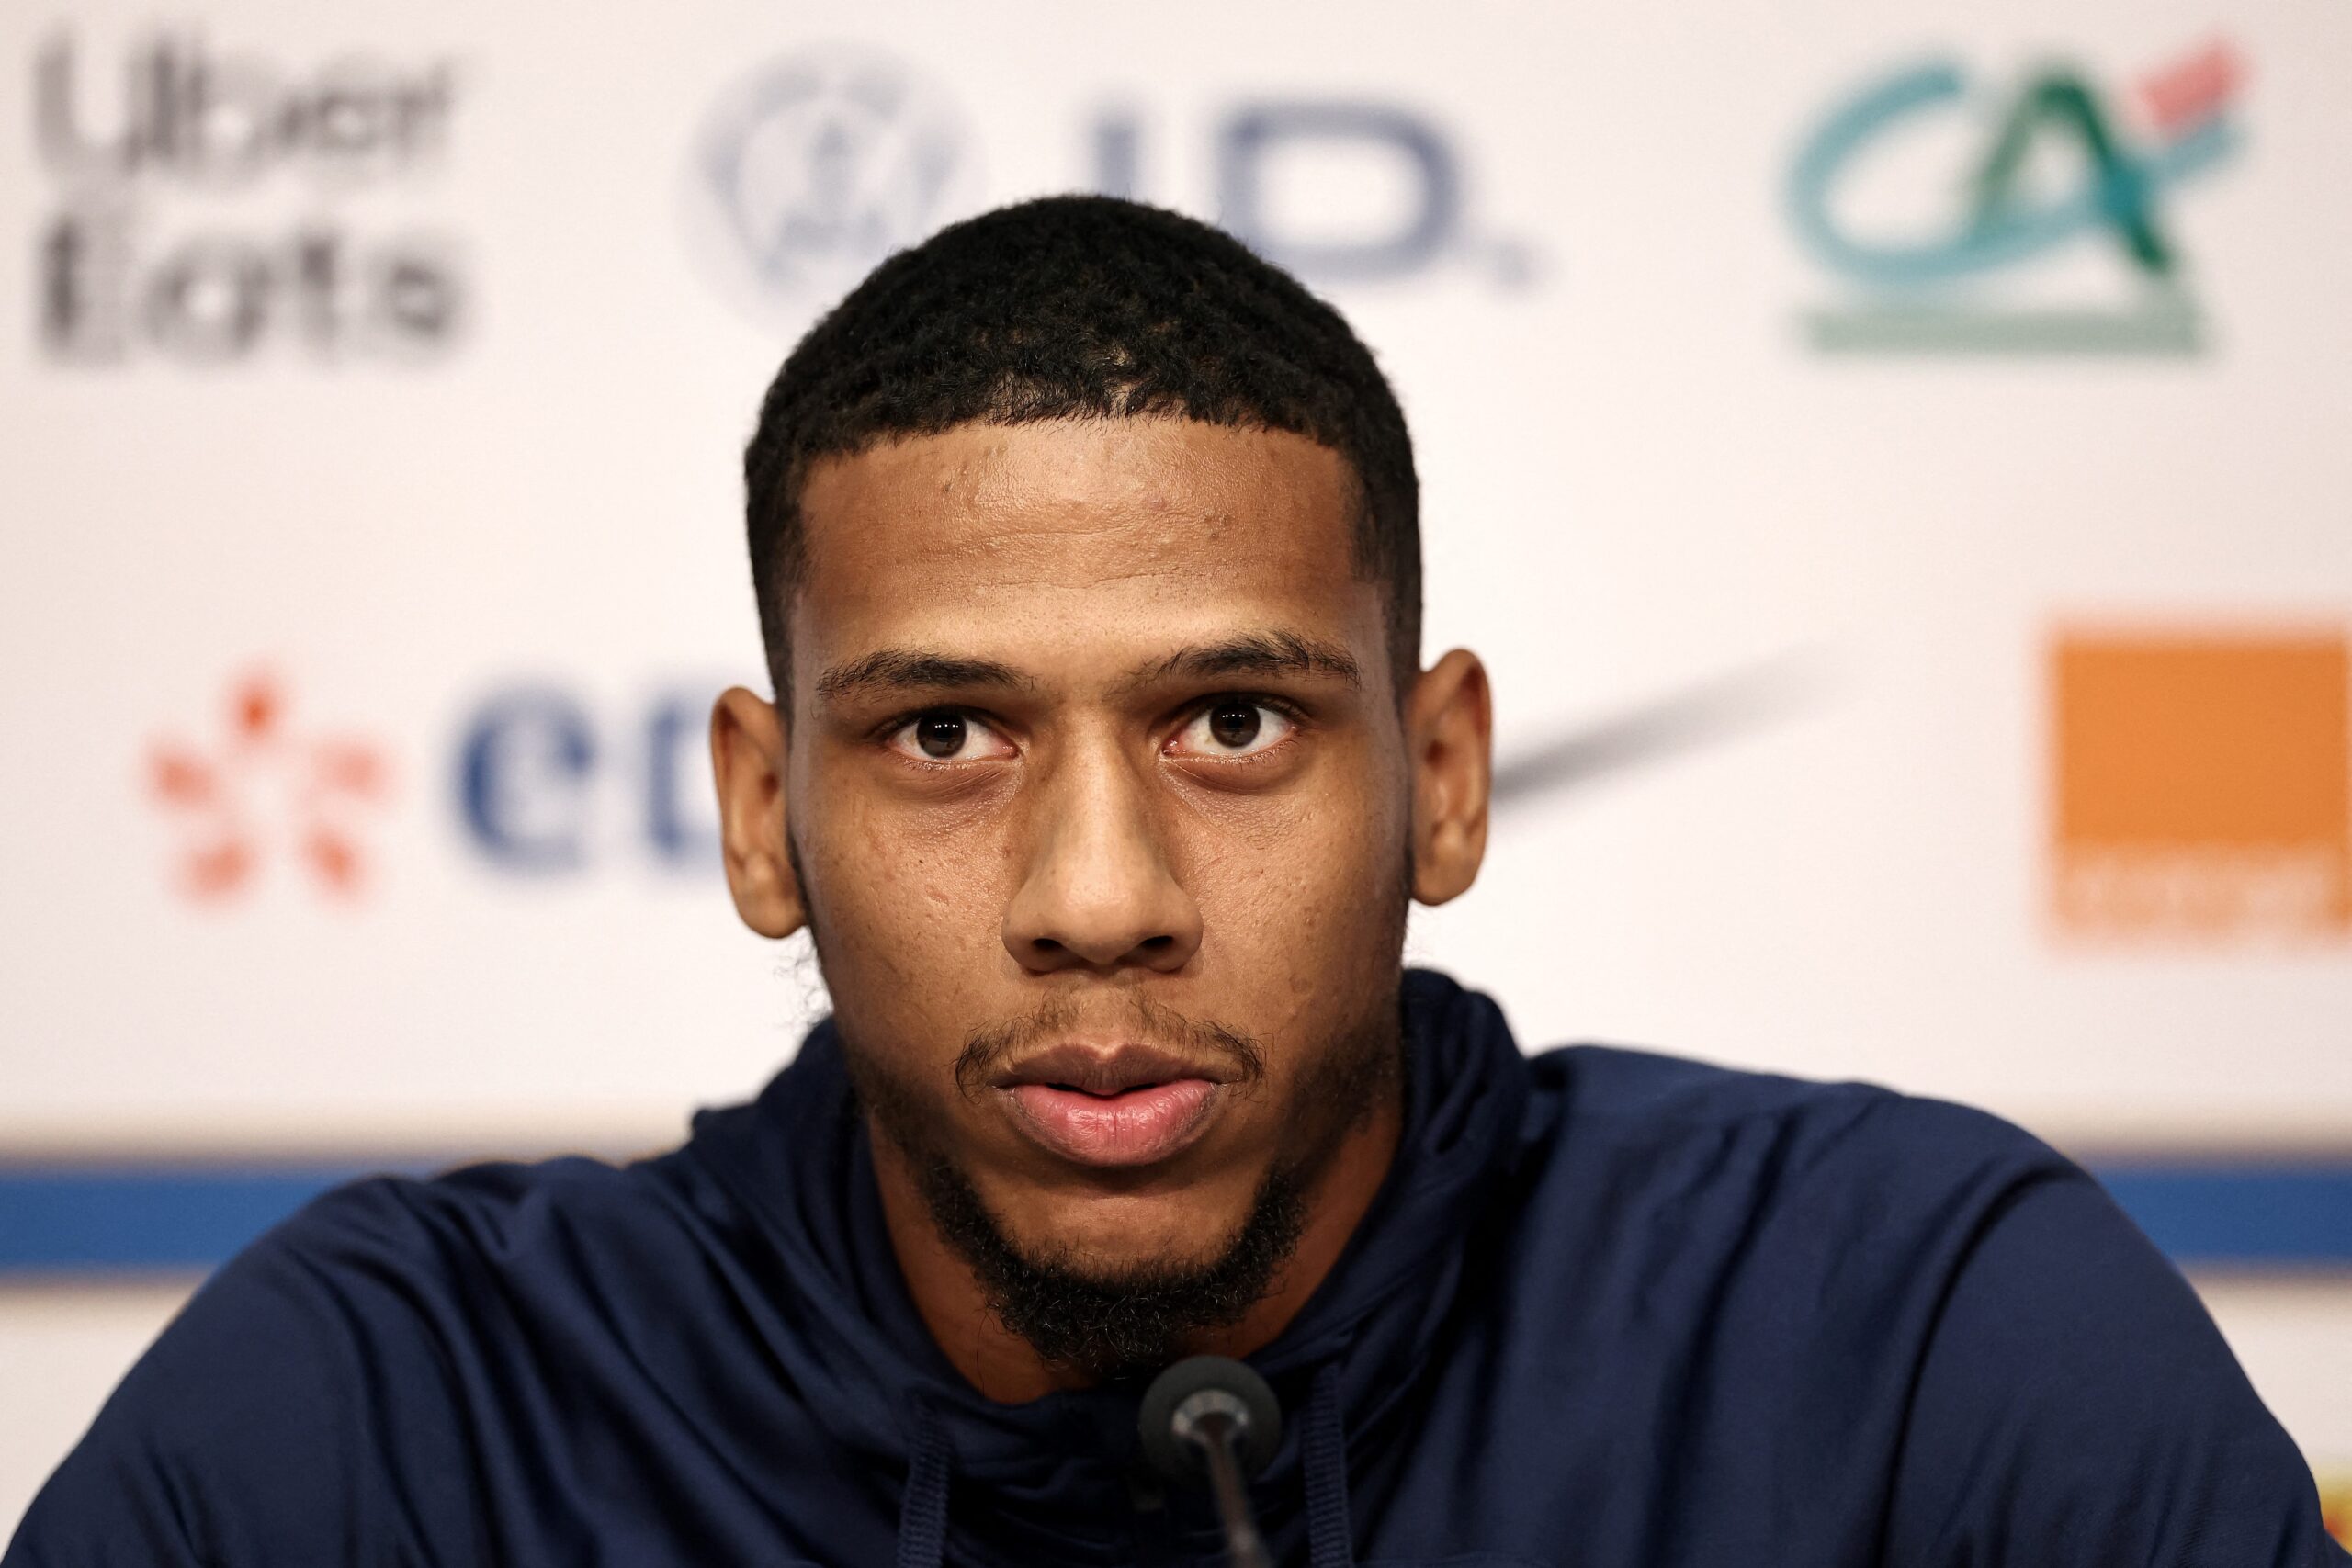 France's defender Jean Clair Todibo speaks during a press conference at Pierre-Mauroy stadium in Lille, northern France on October 16, 2023, on the eve of the friendly international football match between France and Scotland. (Photo by FRANCK FIFE / AFP) (Photo by FRANCK FIFE/AFP via Getty Images)